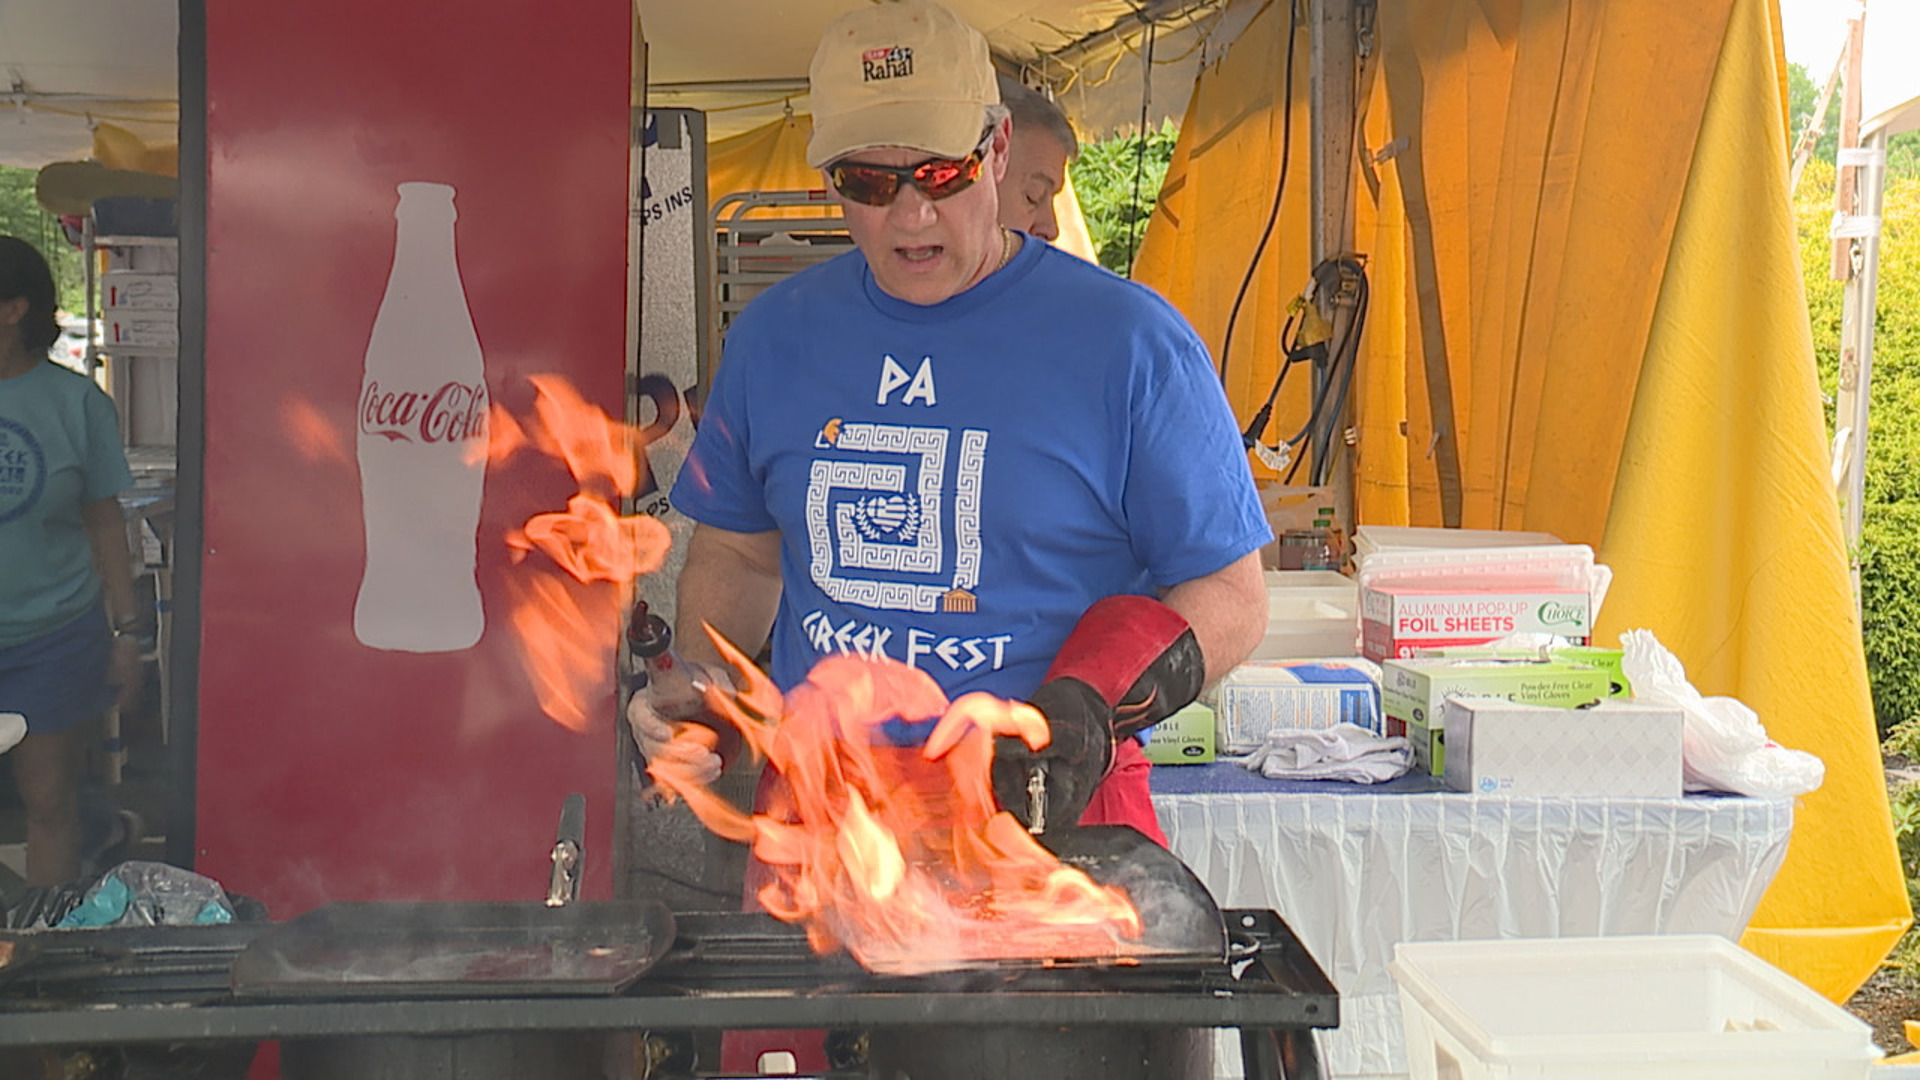 Greek Fest is back for its fifty-second year in Cumberland County.